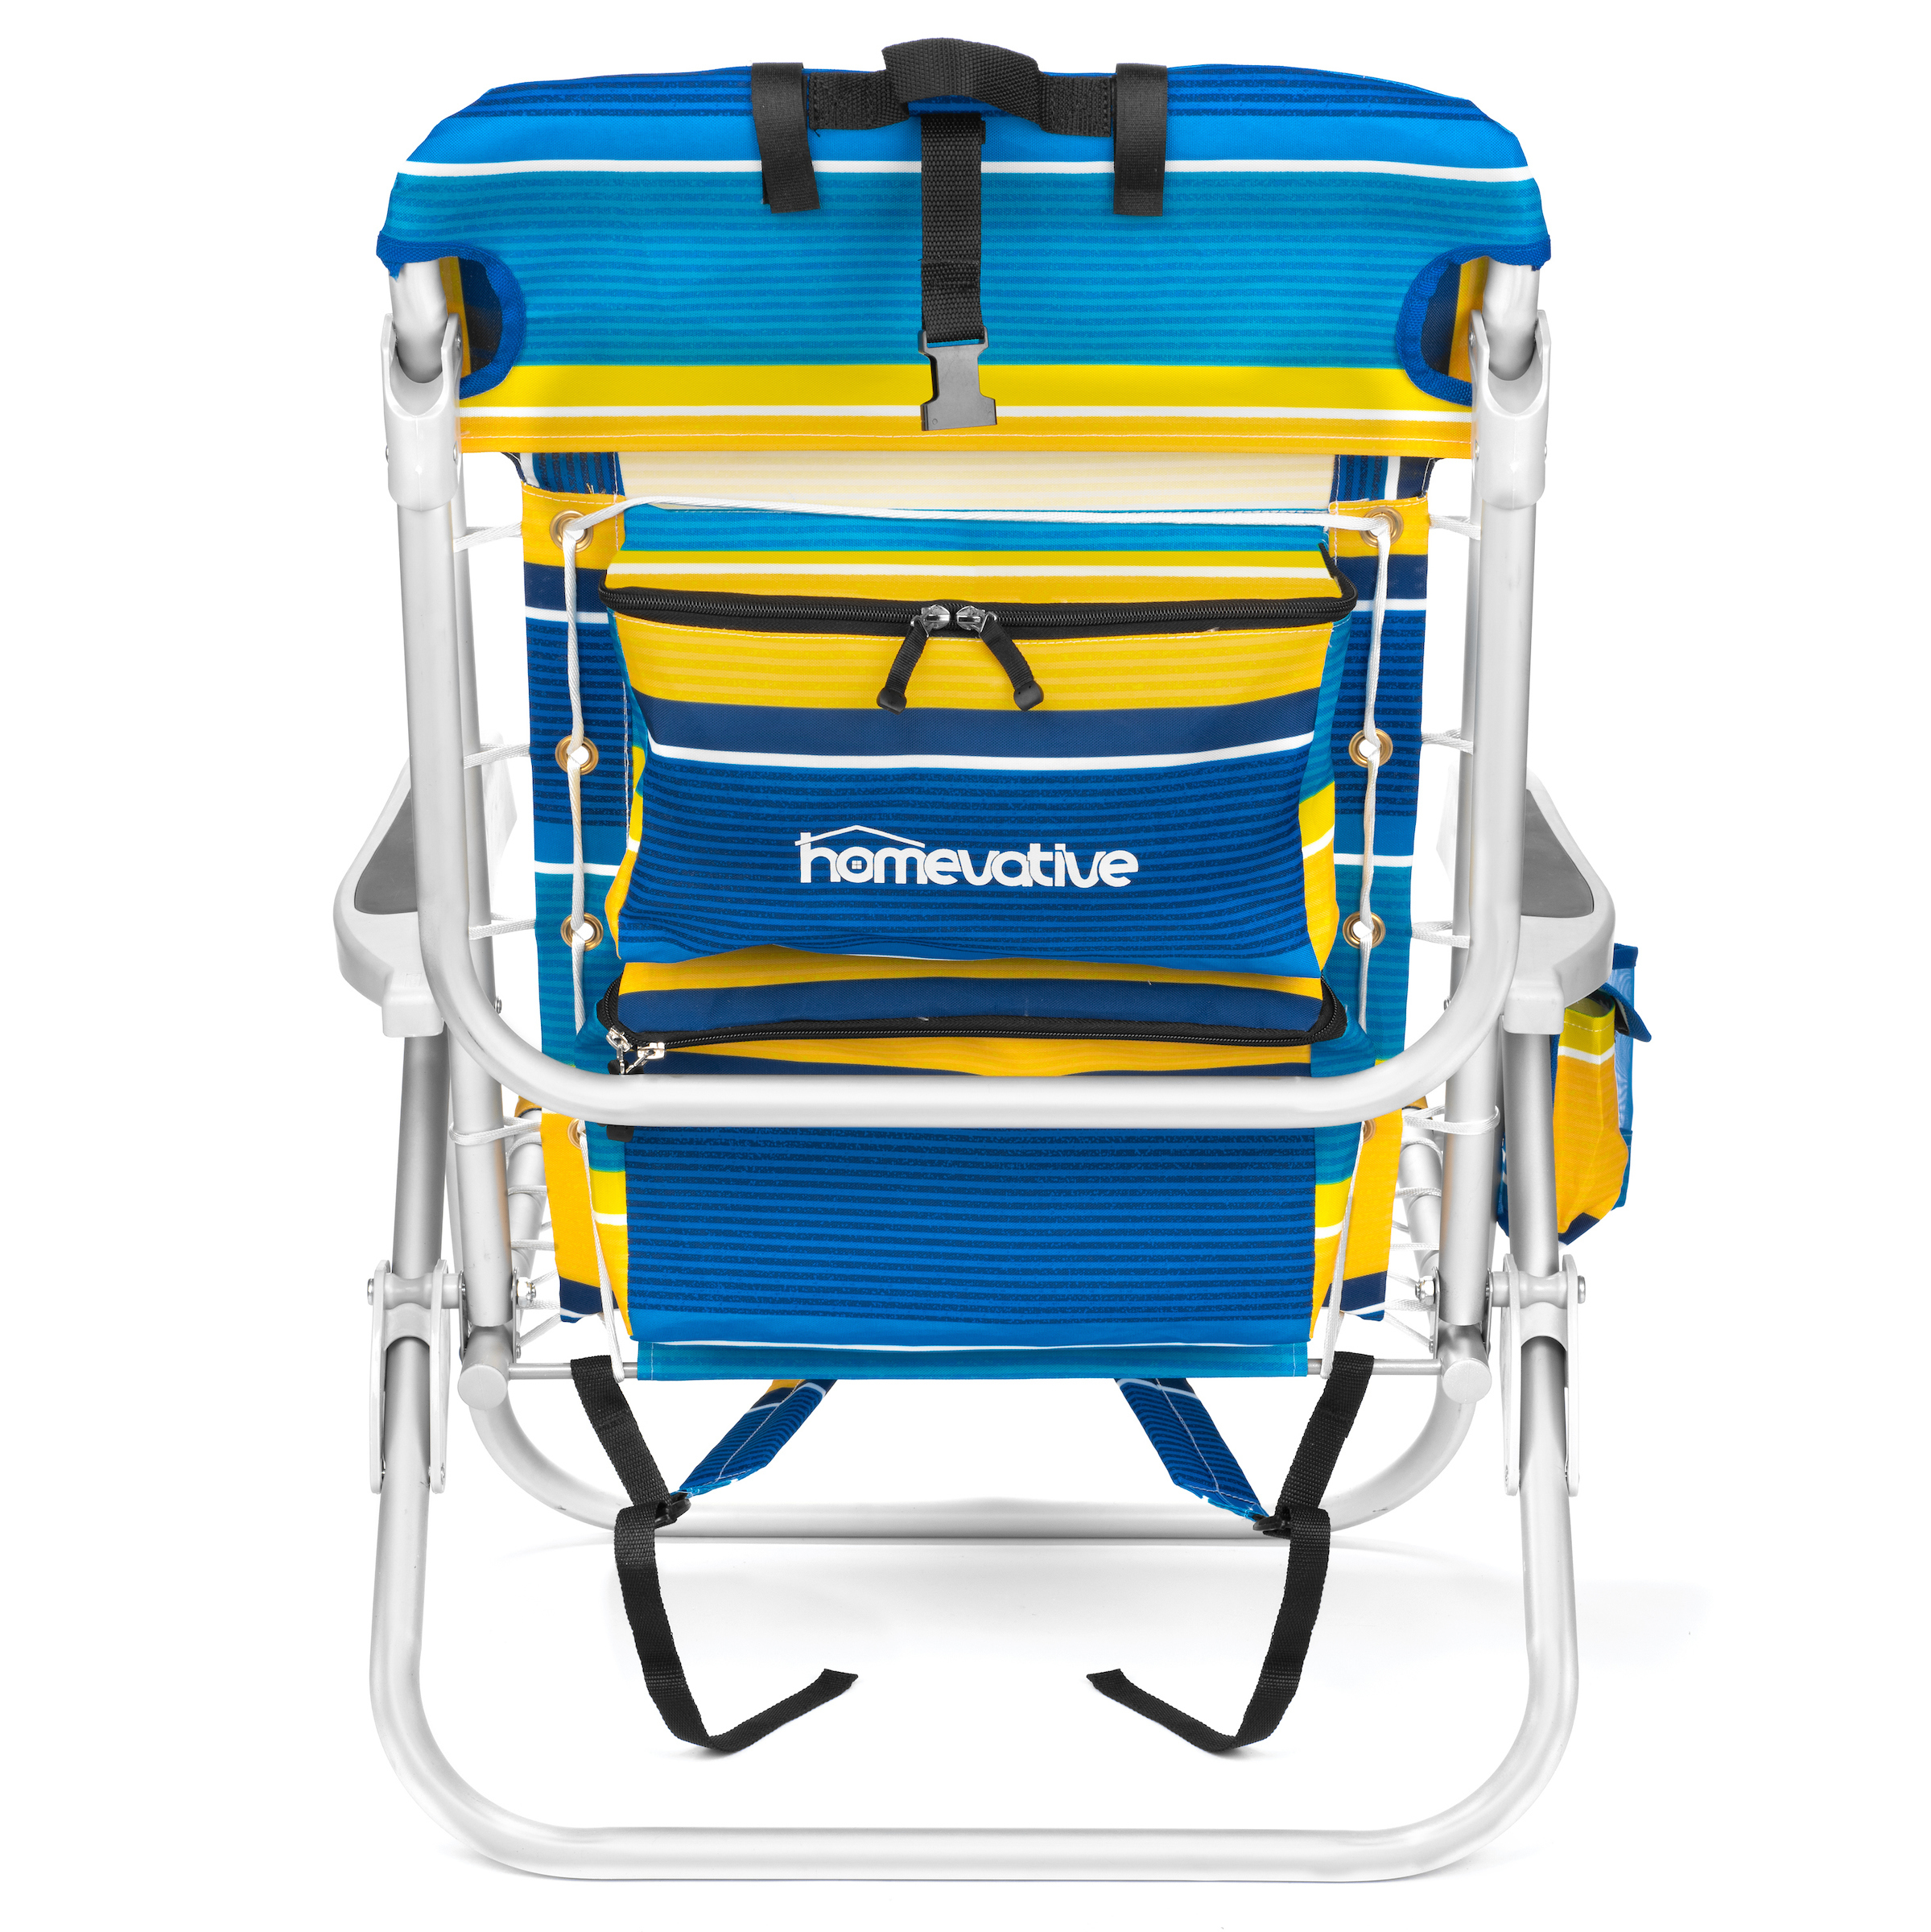 Homevative Folding Backpack Beach Chair with 5 Positions, Towel bar, Blue Yellow - image 2 of 4